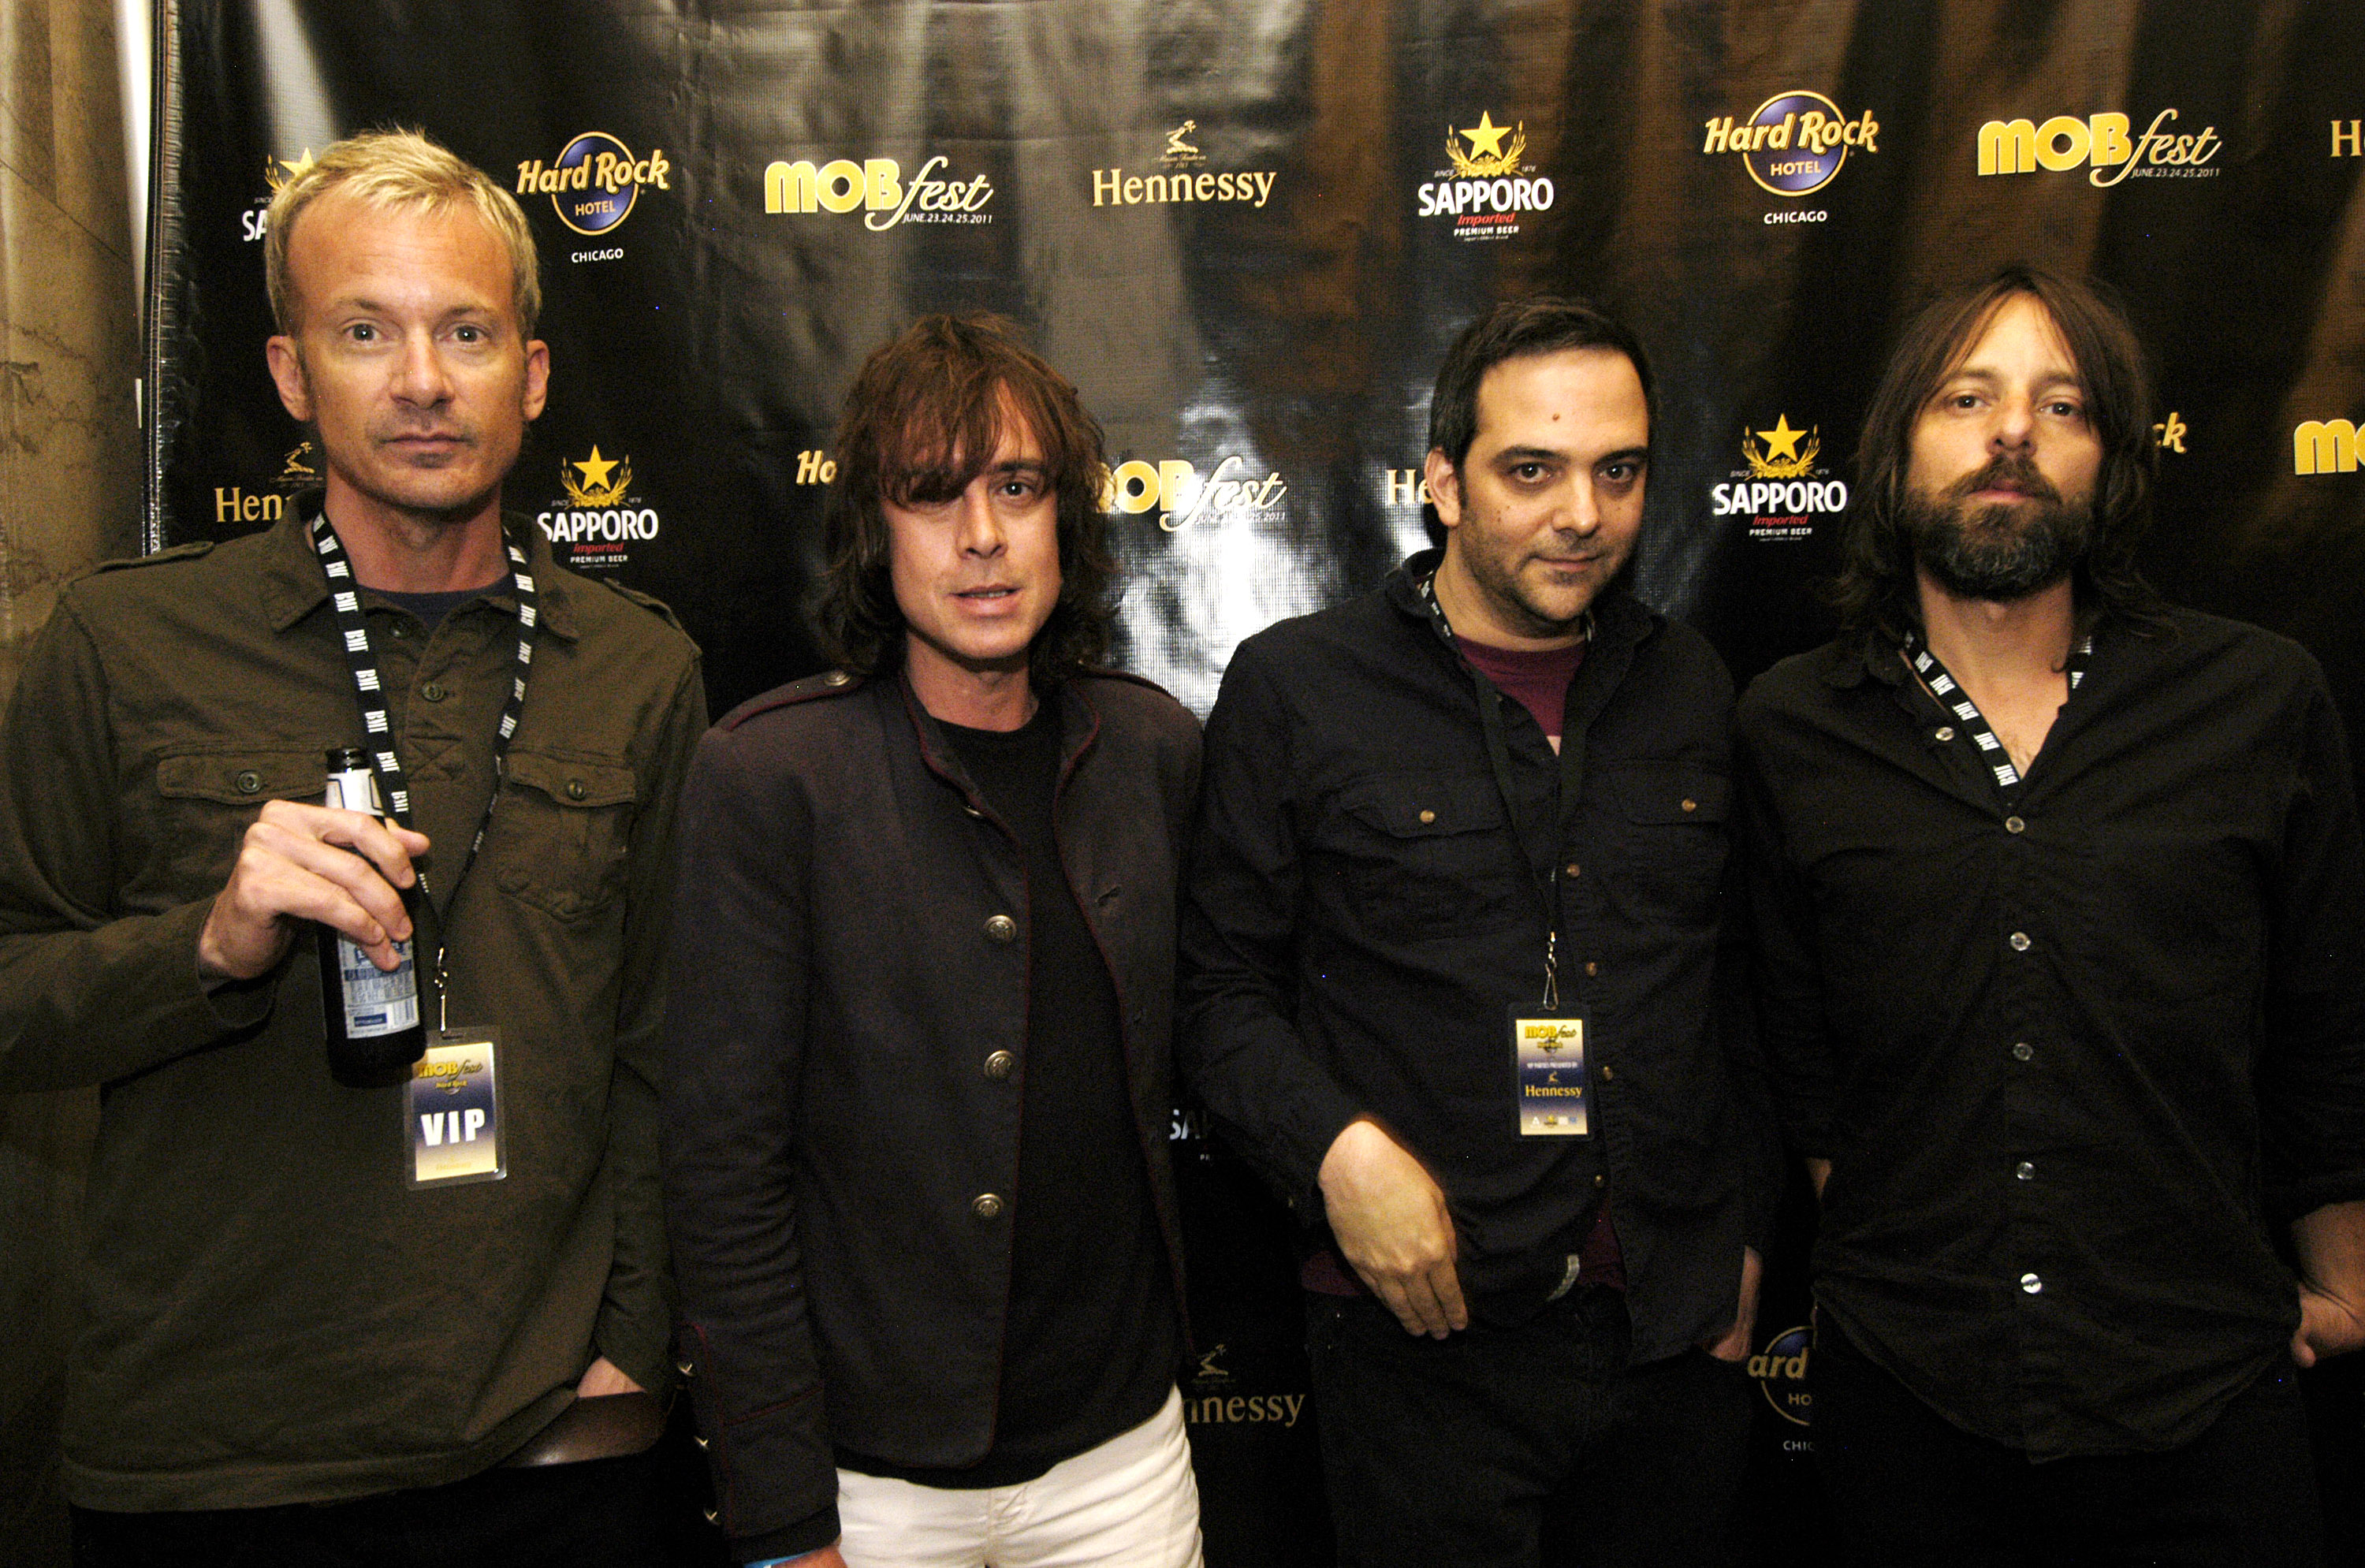 Chris Collingwood, Jody Porter, Adam Schlesinger, and Brian Young of Fountains of Wayne in front of a black backdrop